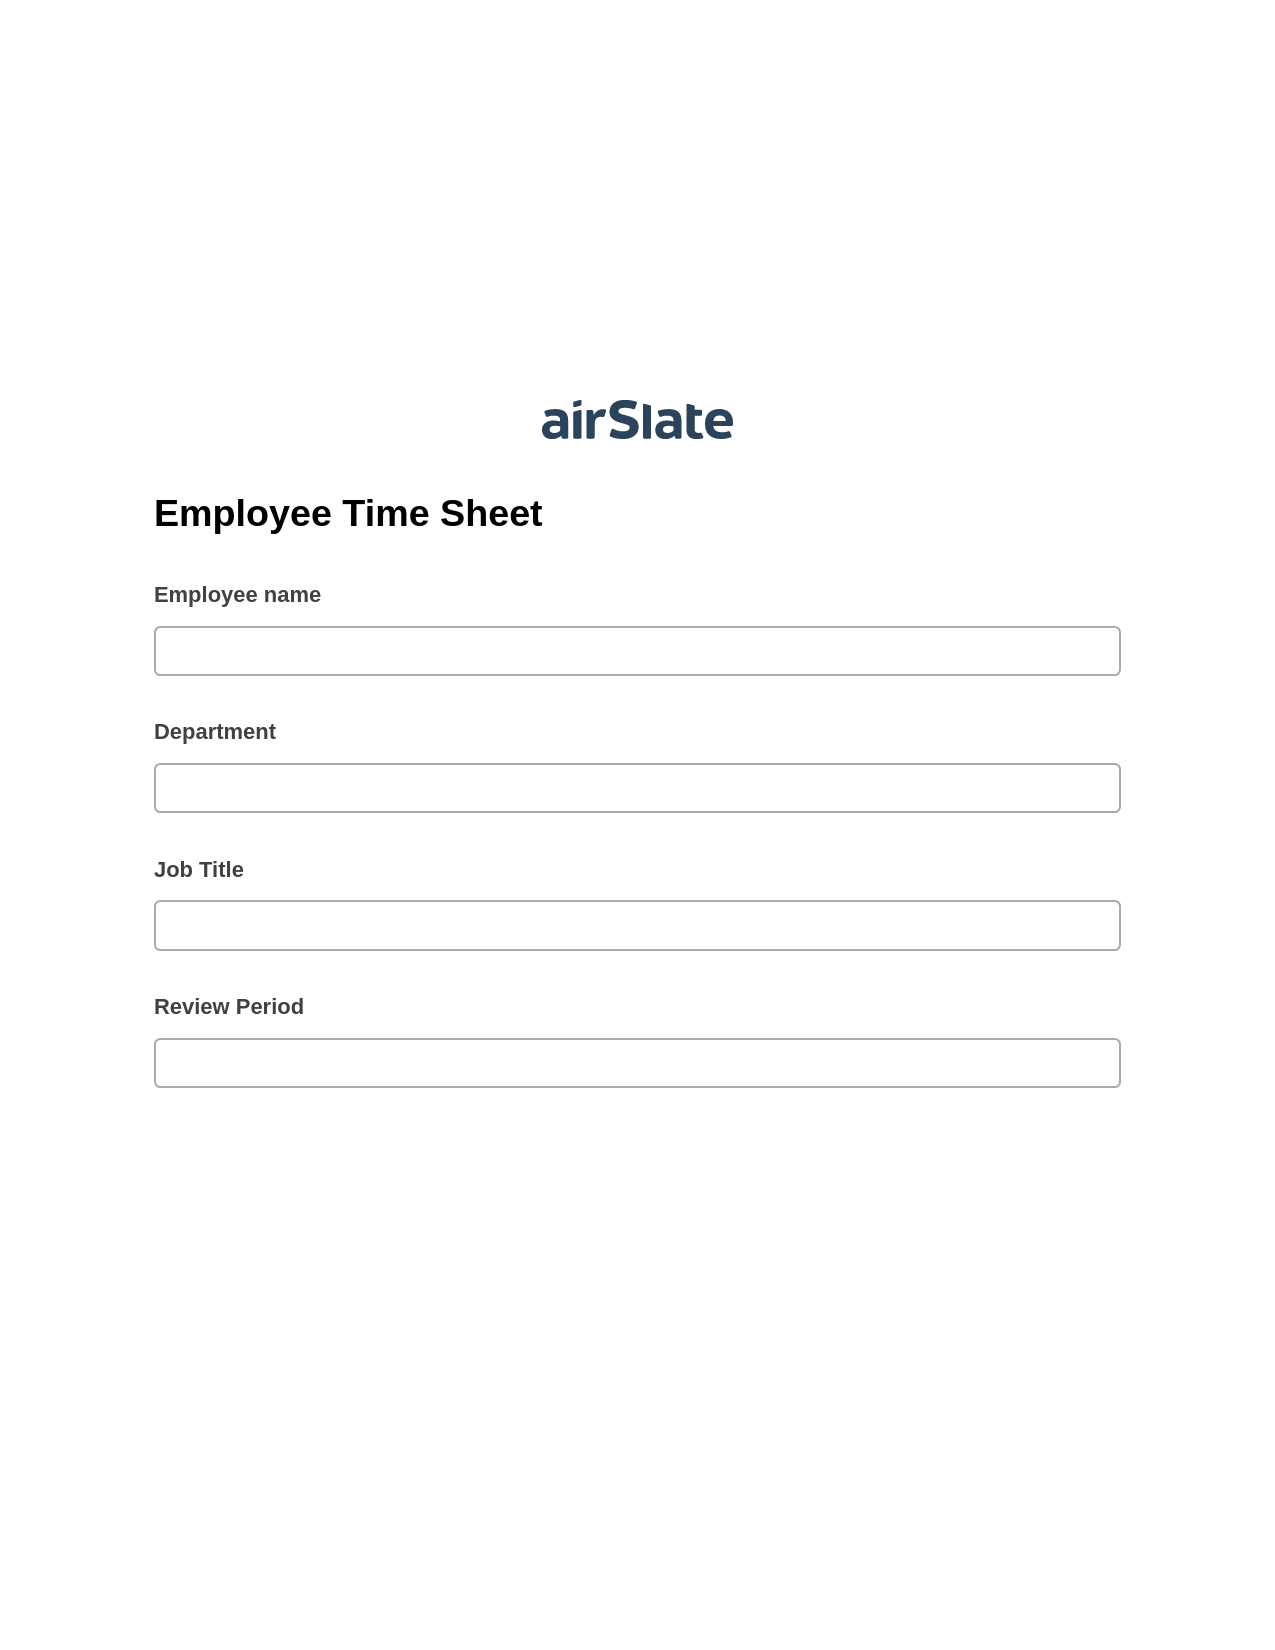 Multirole Employee Time Sheet Pre-fill from MS Dynamics 365 Records, Email Notification Bot, Export to Smartsheet